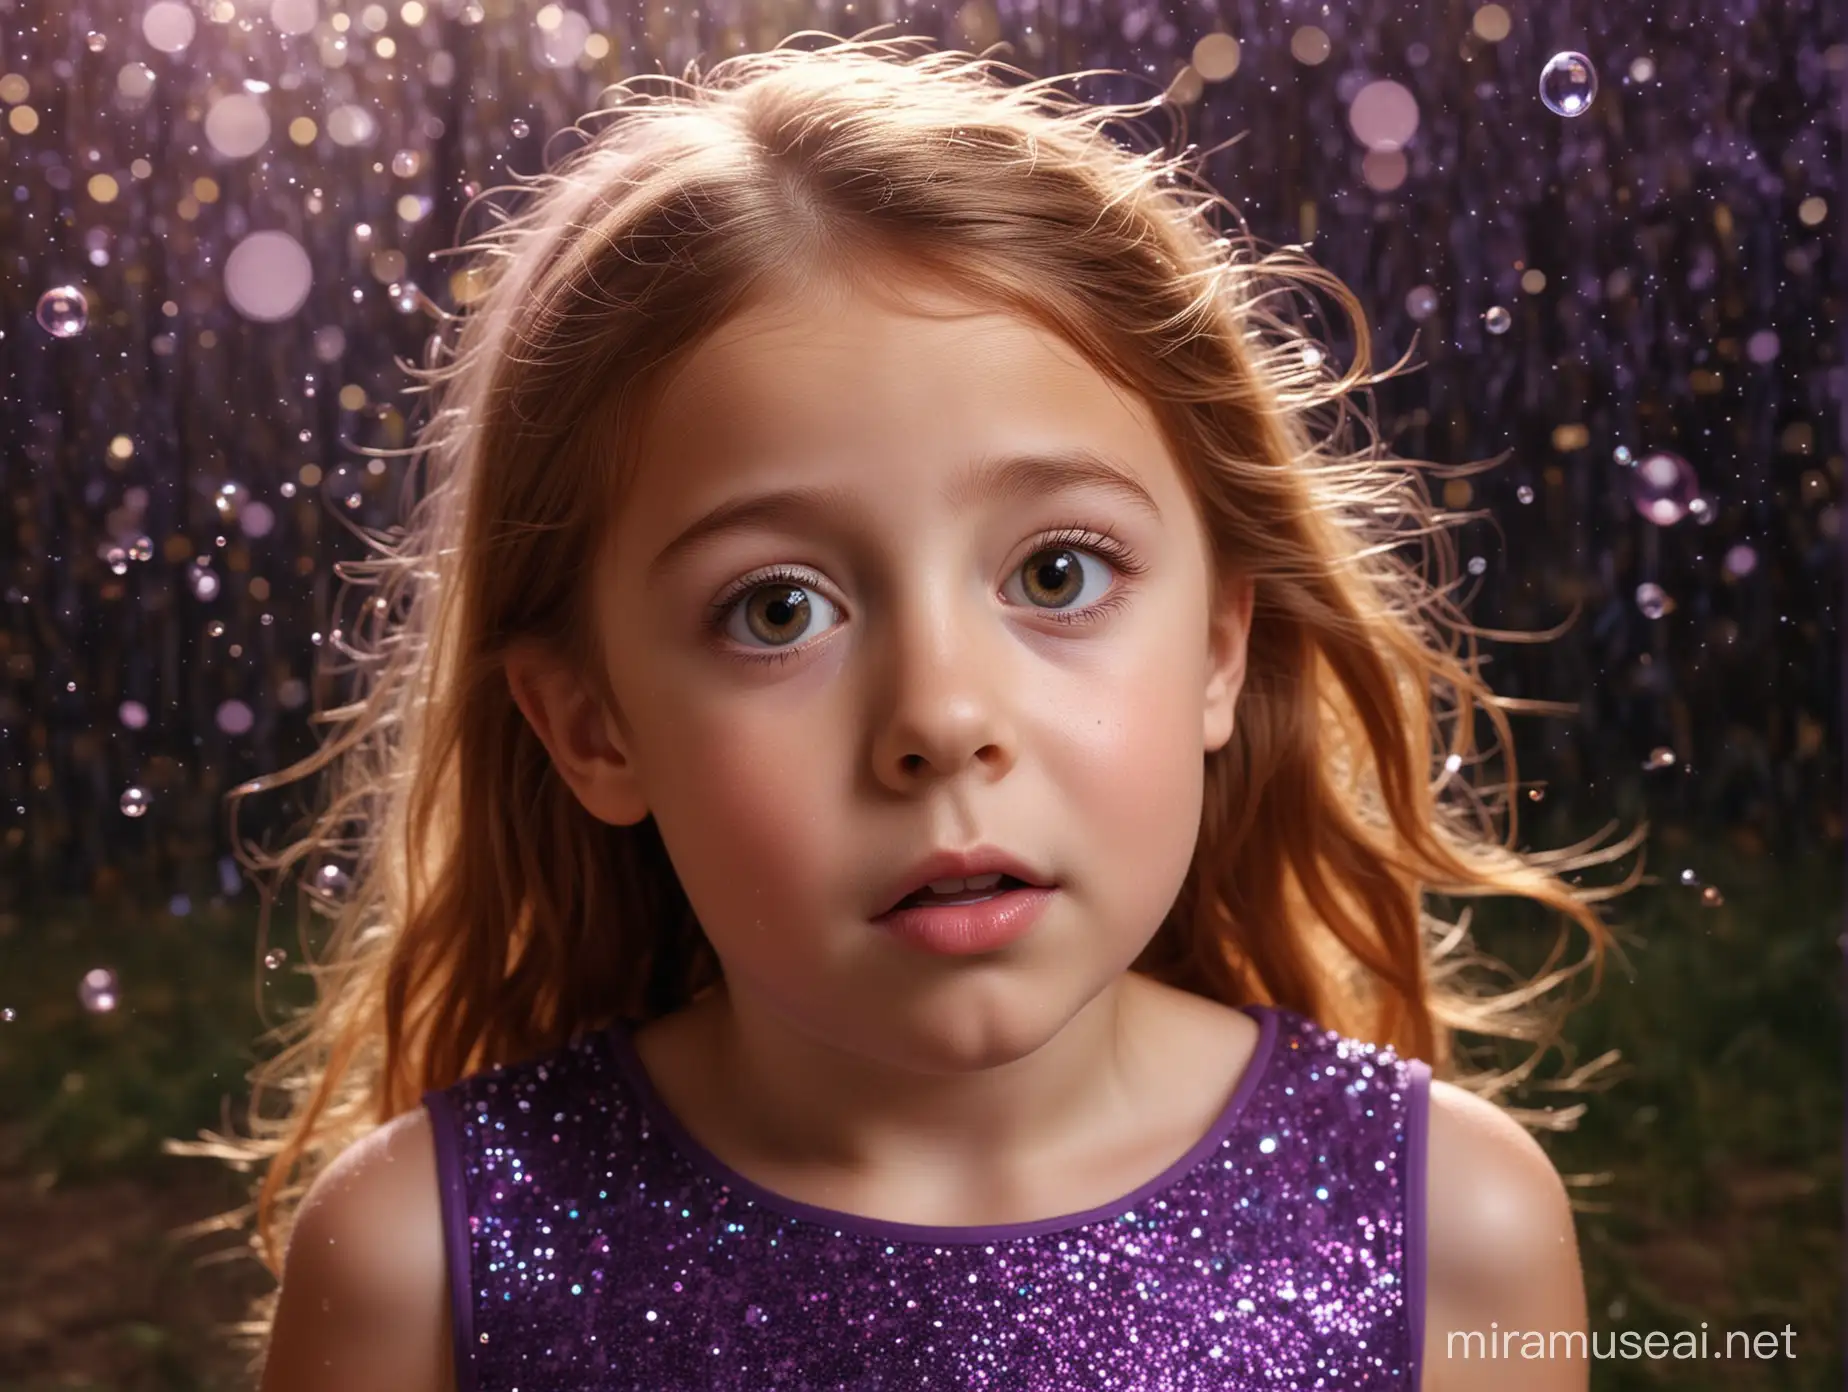 Surprised SixYearOld Girl in Shiny Purple Dress Amidst Enchanted Forest Night